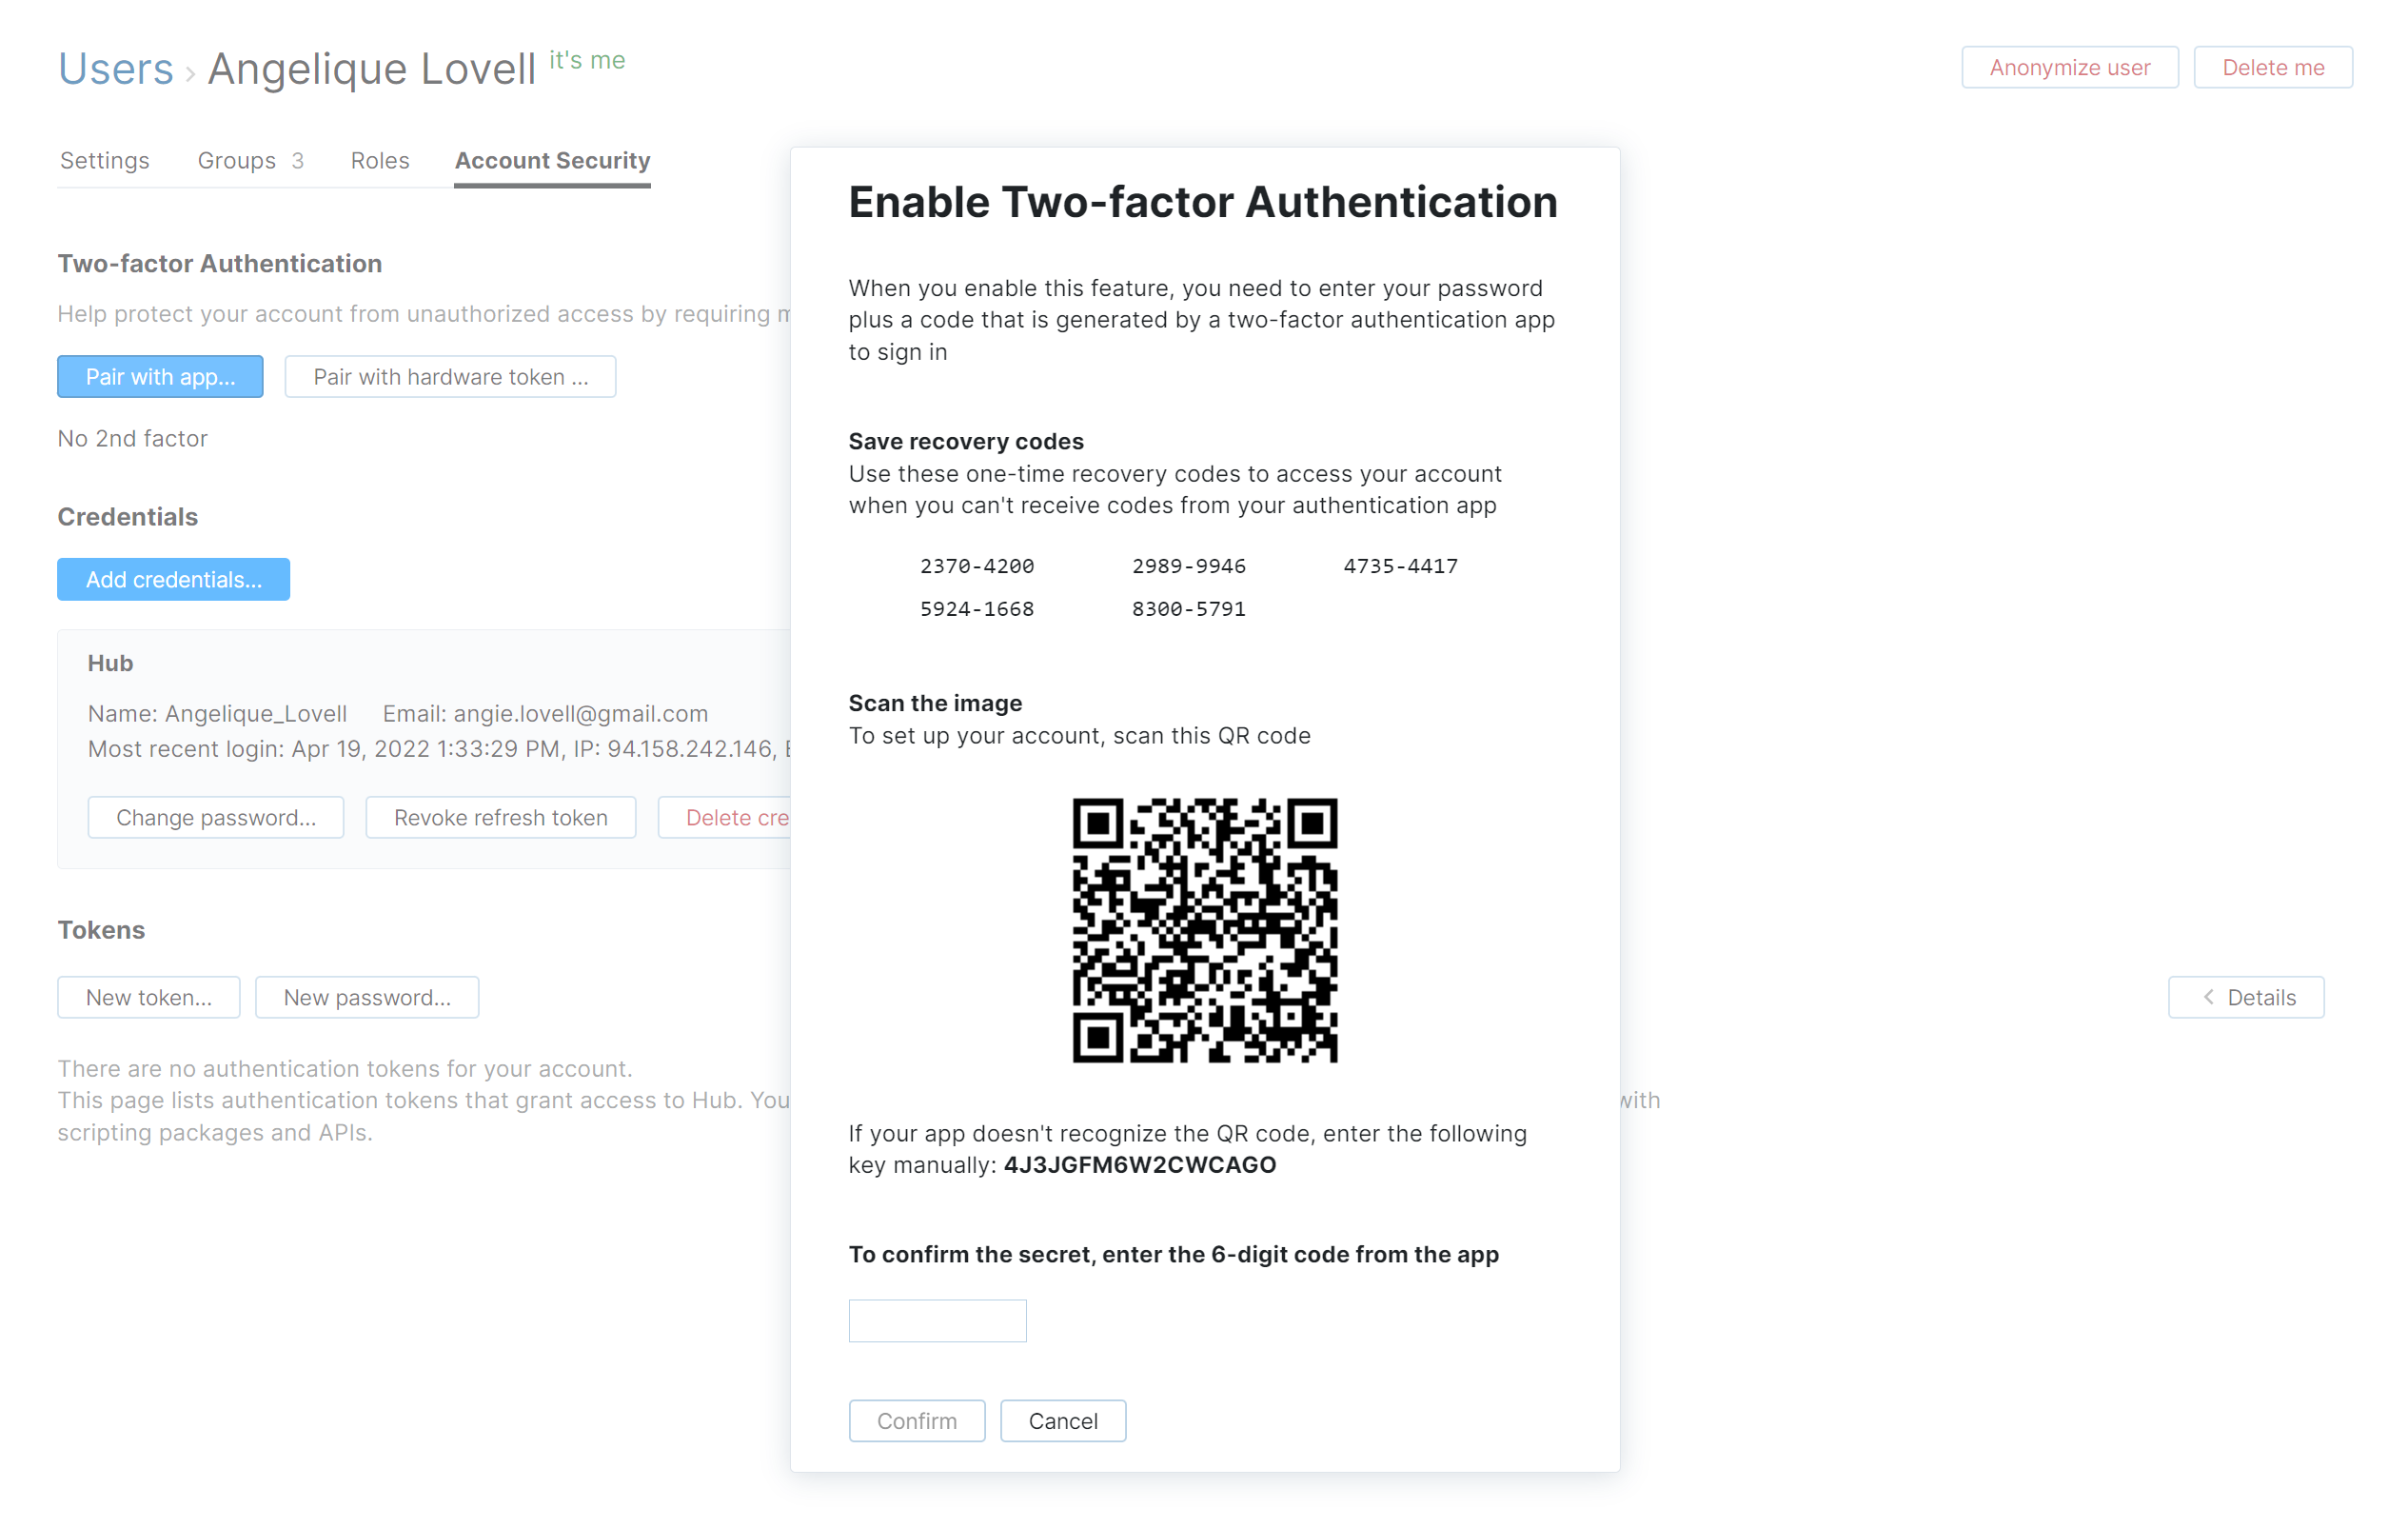 Enable two factor authentication dialog